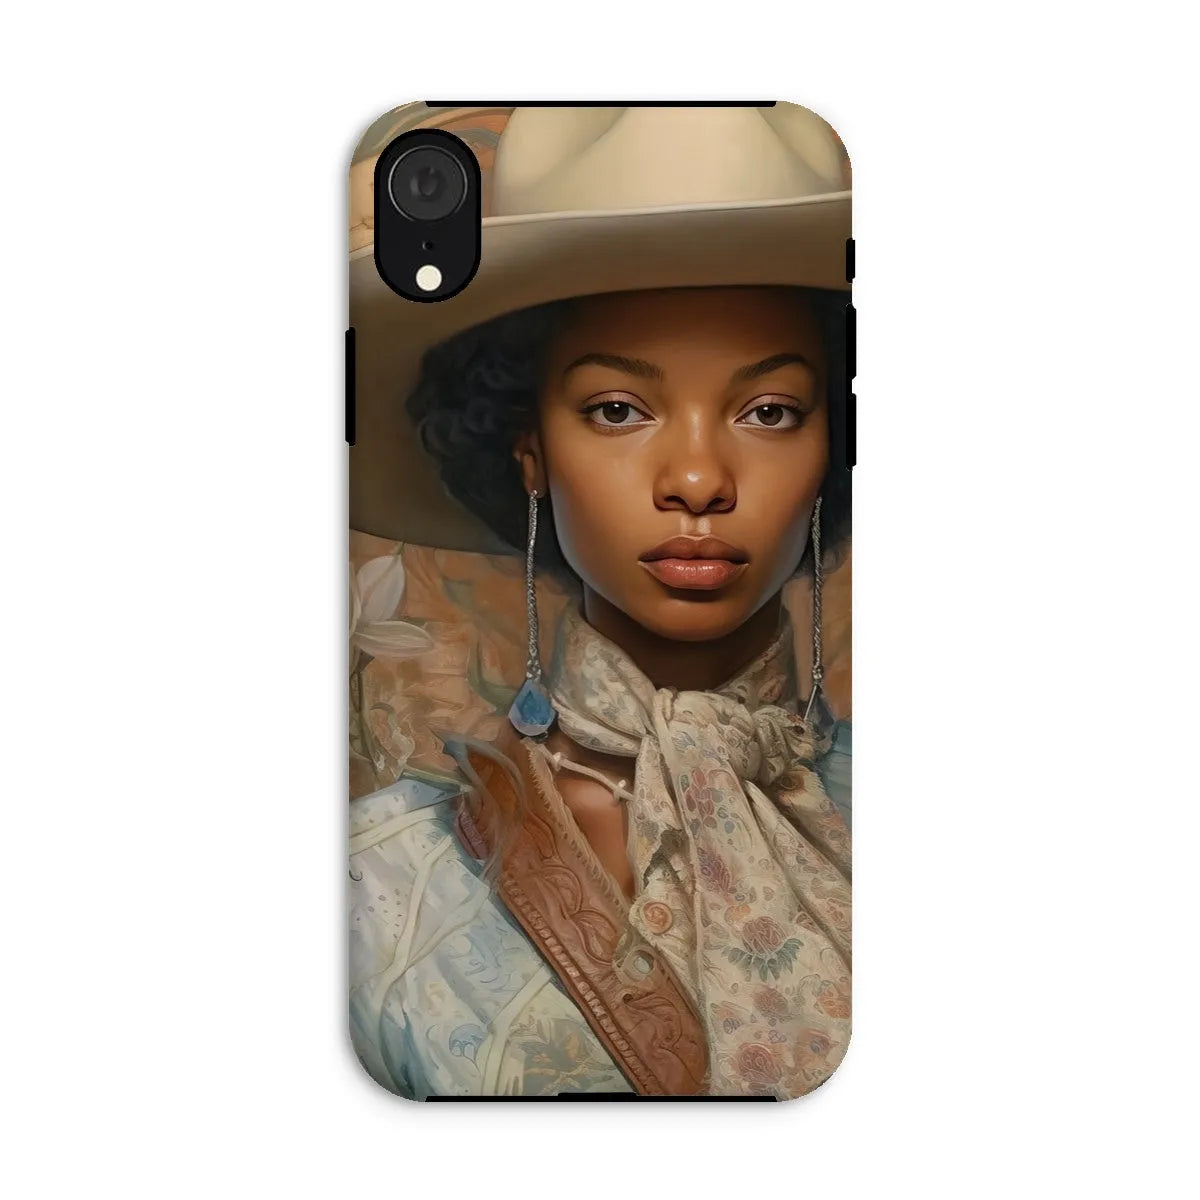 Imani The Lesbian Cowgirl - Sapphic Art Phone Case - Iphone Xr / Matte - Mobile Phone Cases - Aesthetic Art